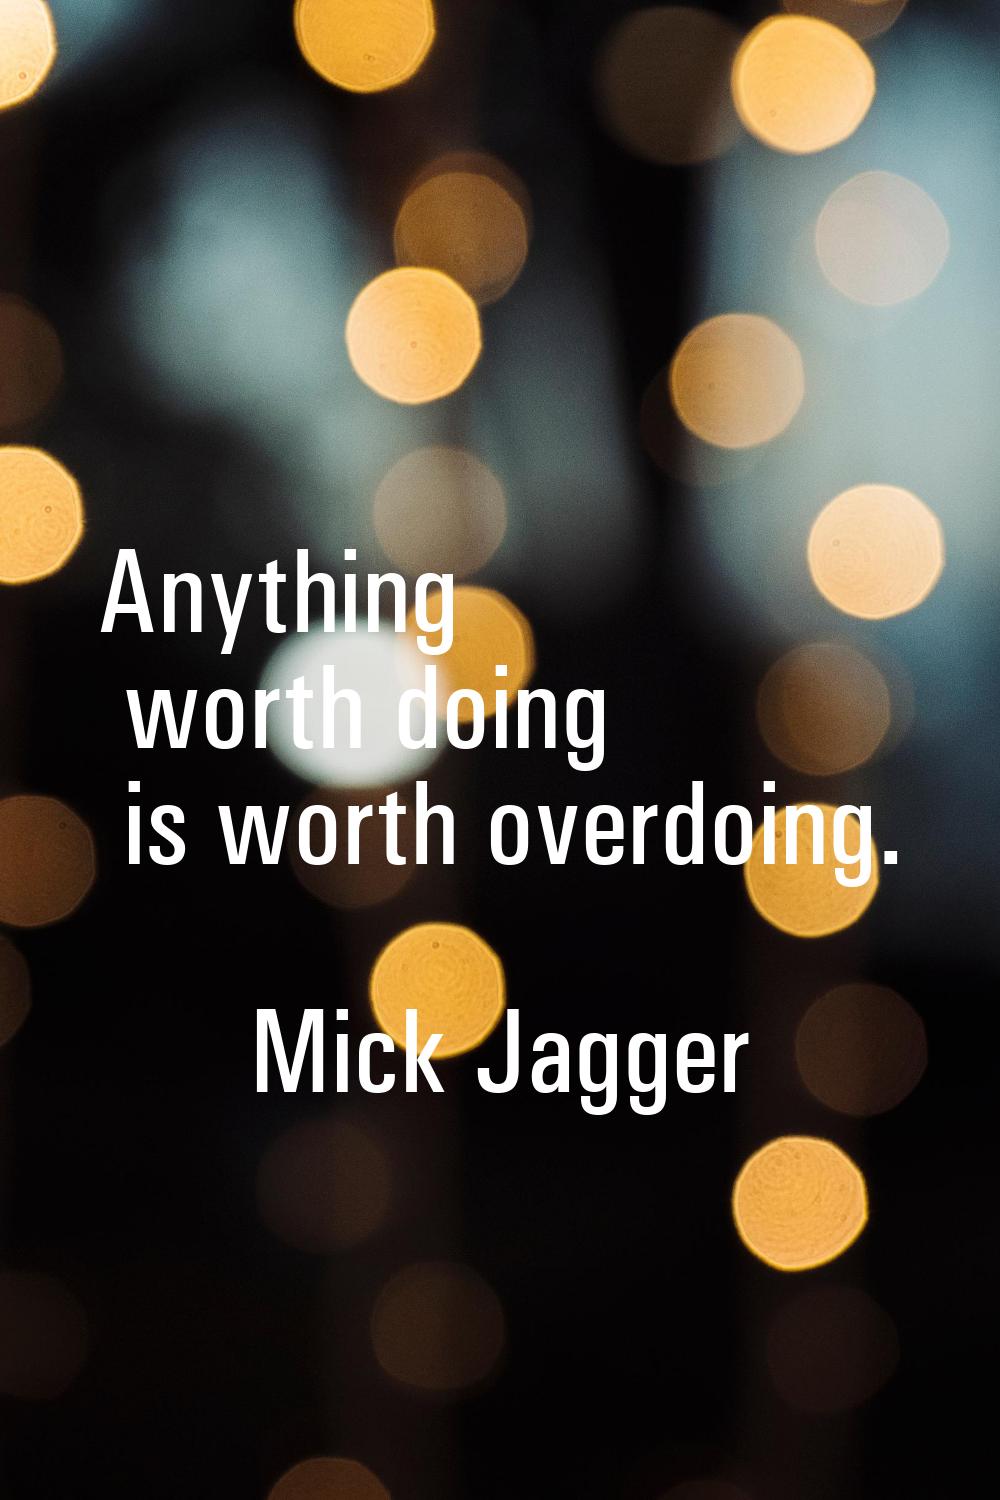 Anything worth doing is worth overdoing.